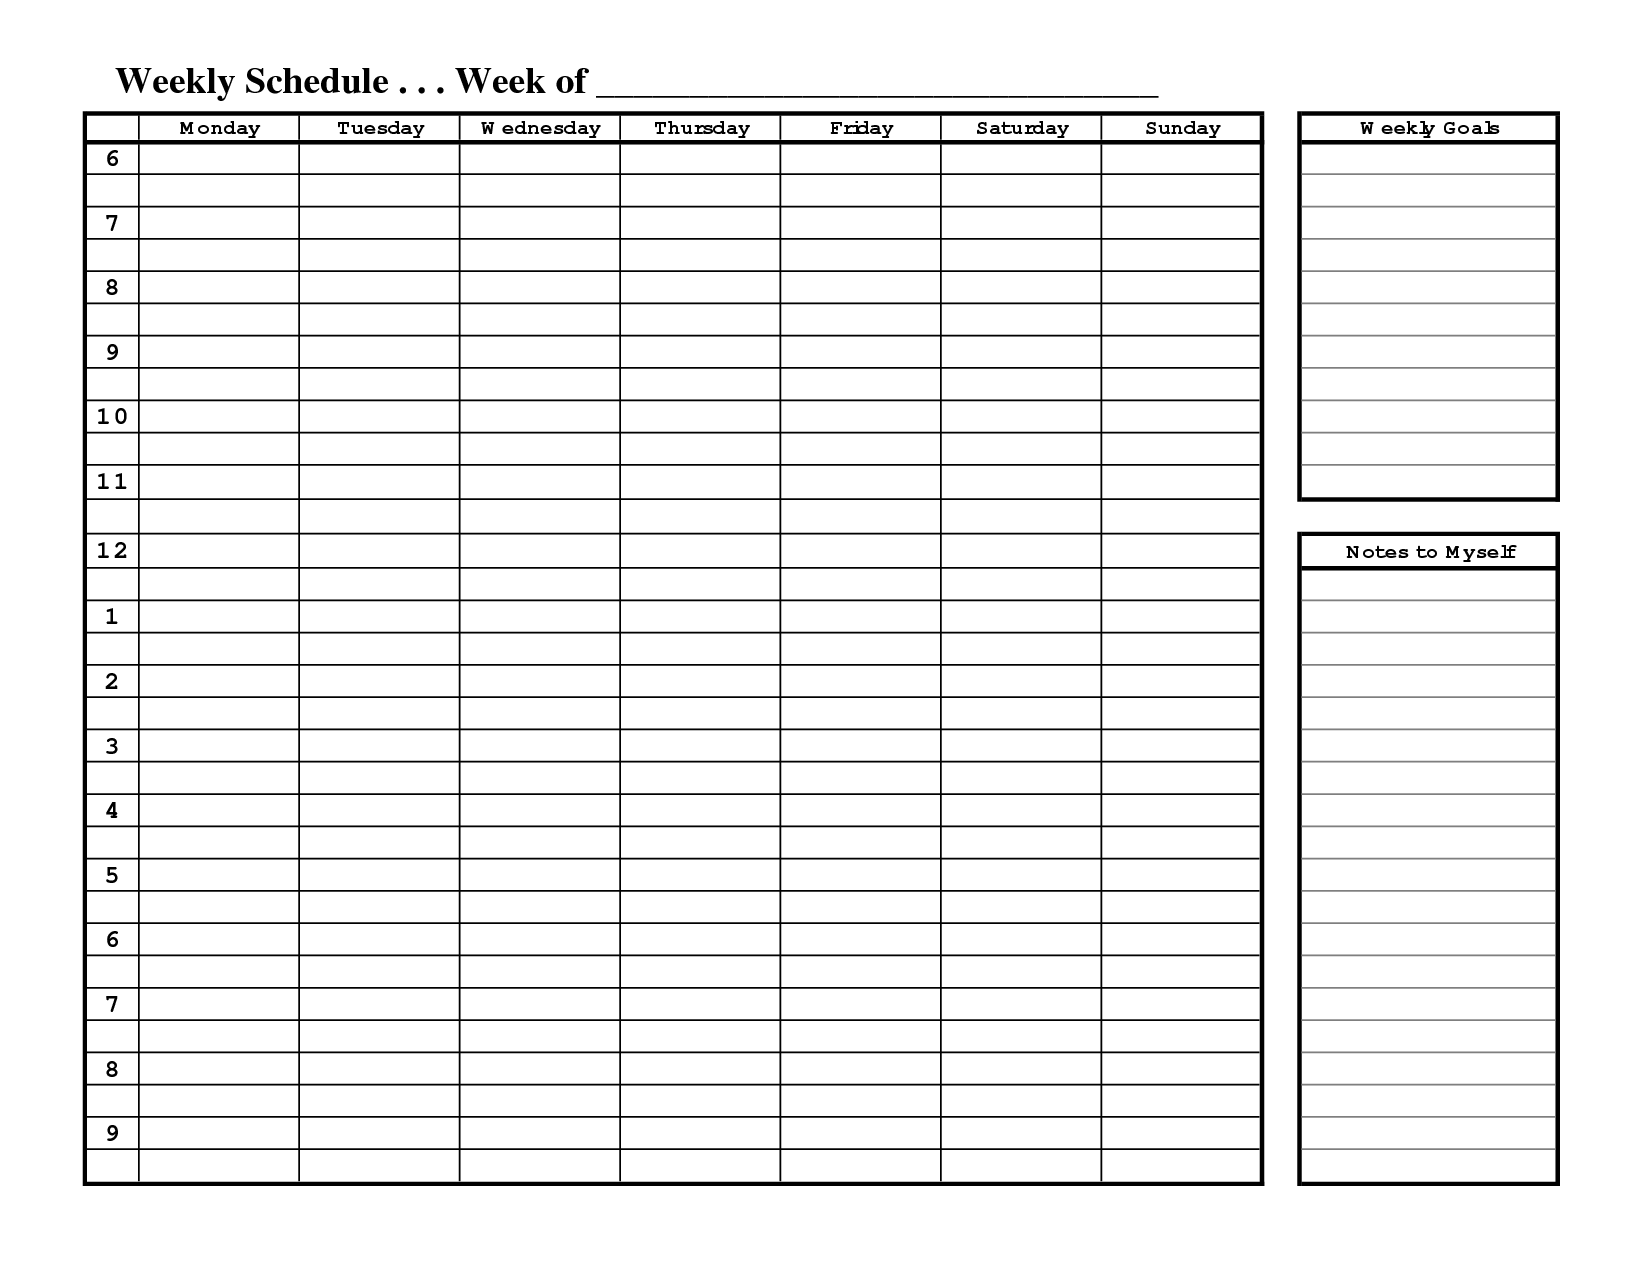 Schedule Printable Images Gallery Category Page 1 - printablee.com